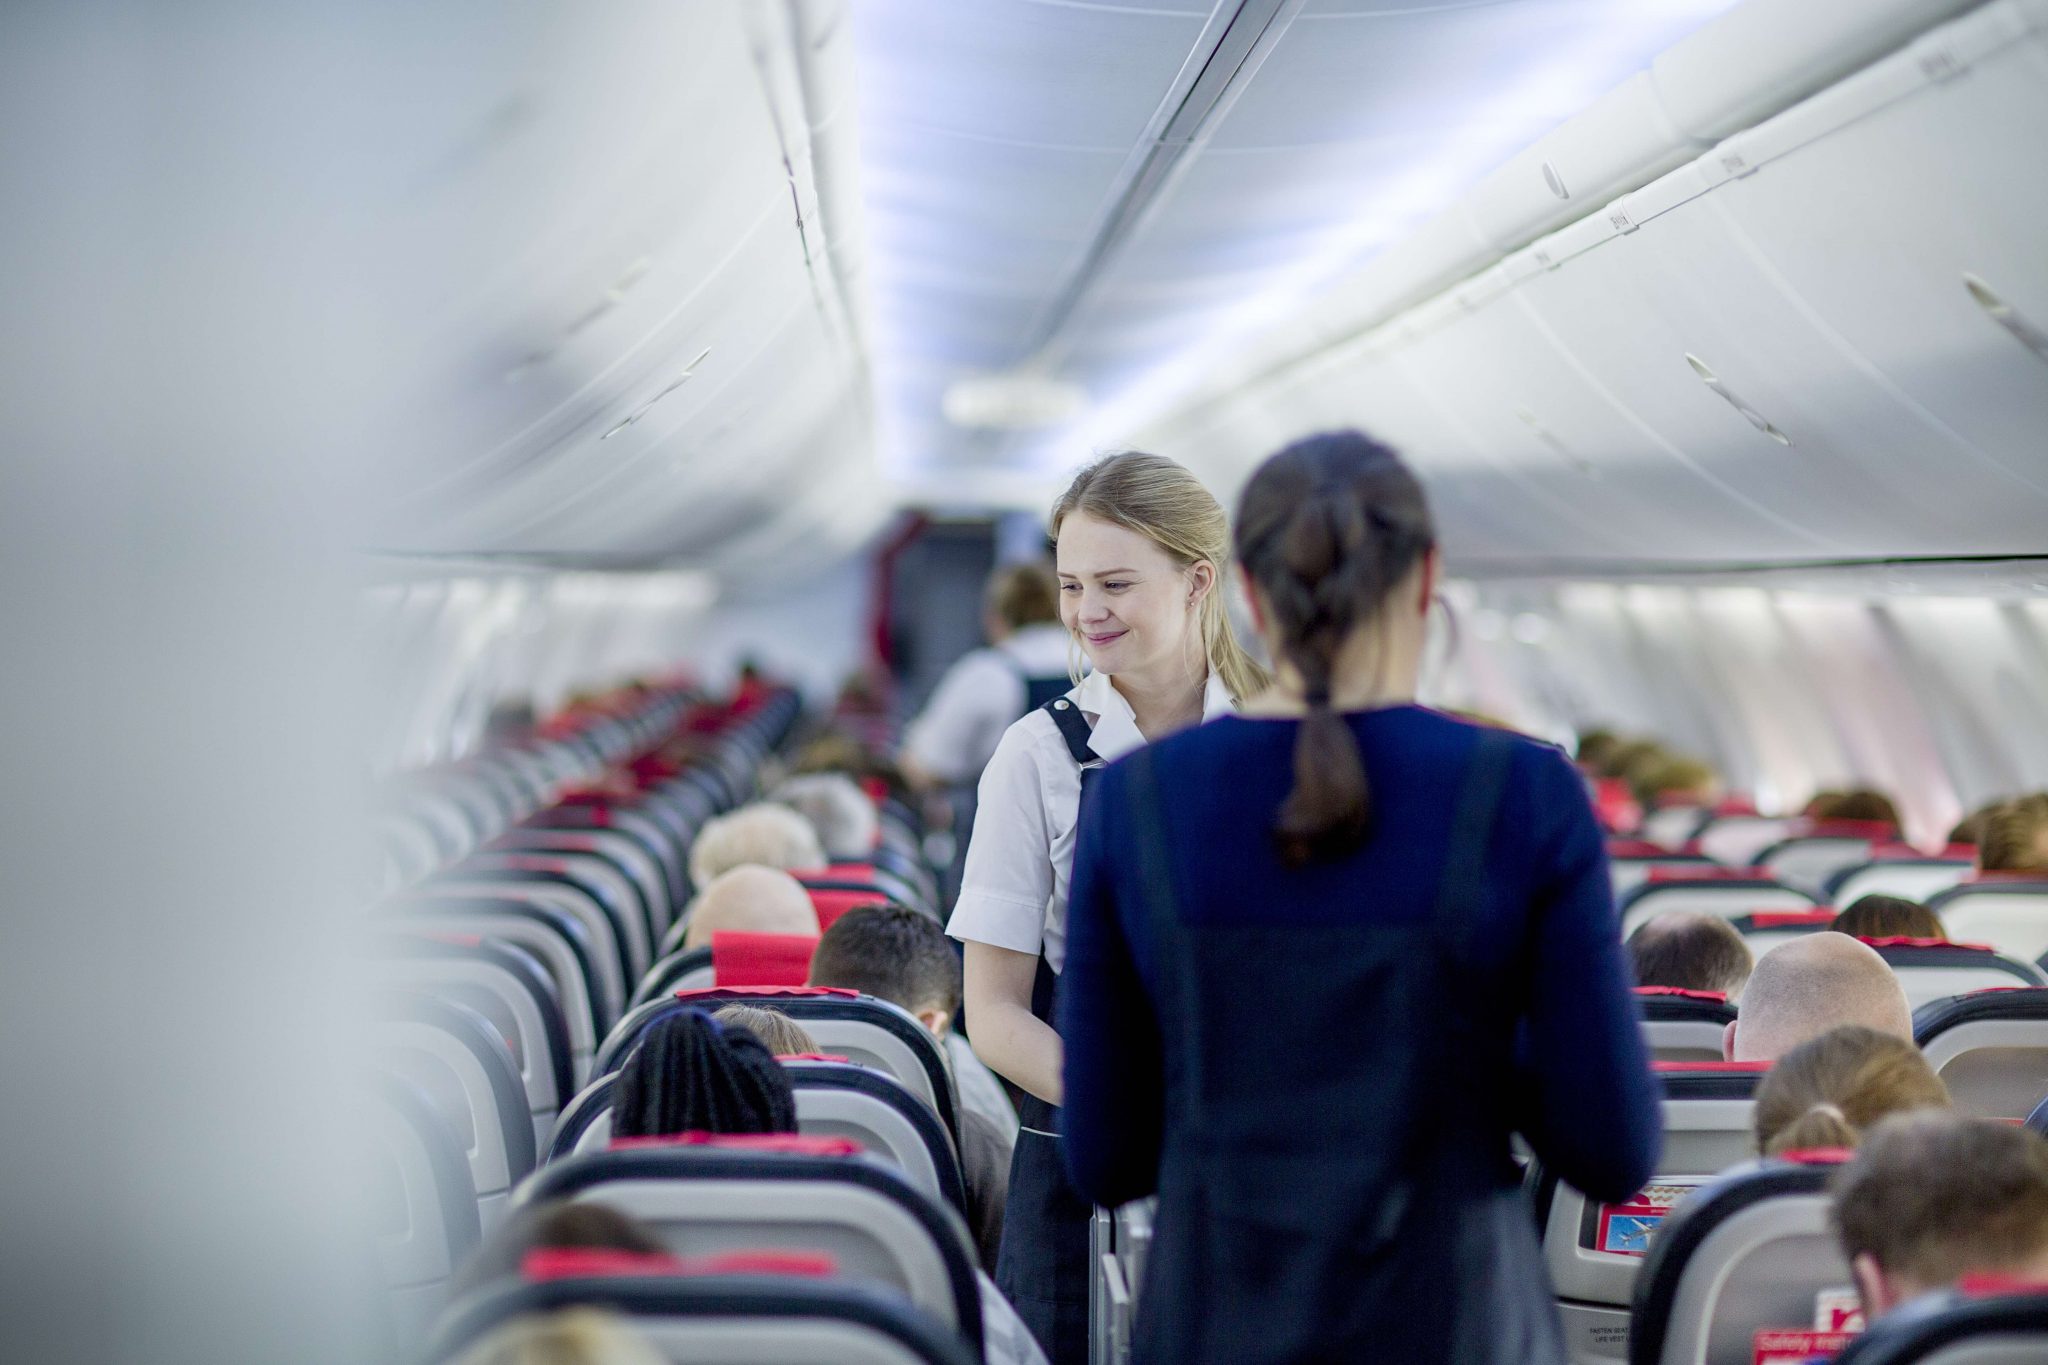 "The year 1950 rang and it wants its rulebook back": Norwegian Slammed For New Uniform Guidelines